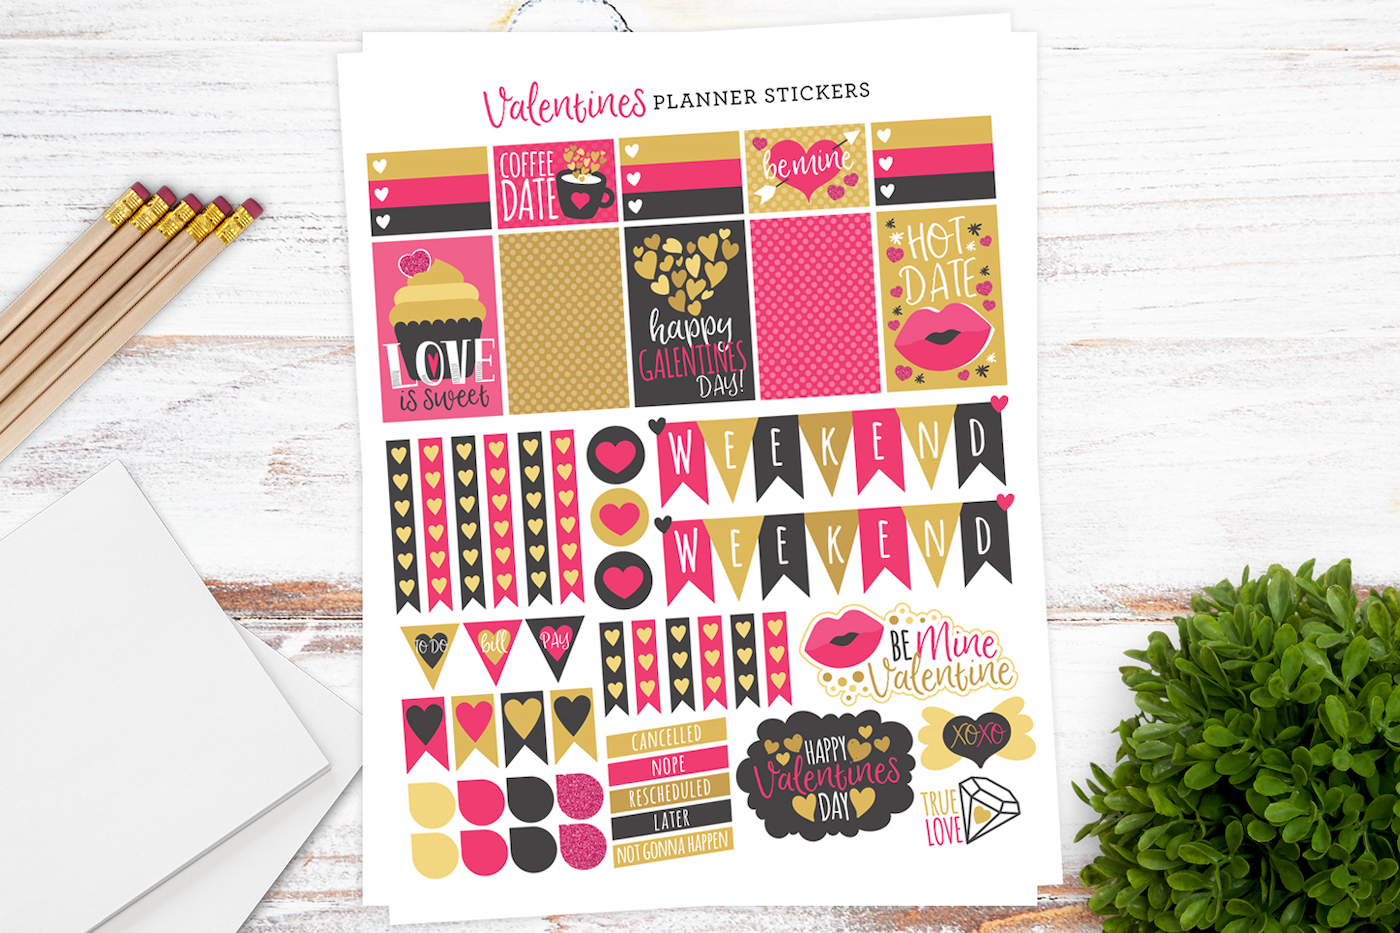 Valentine's Day planner stickers for free